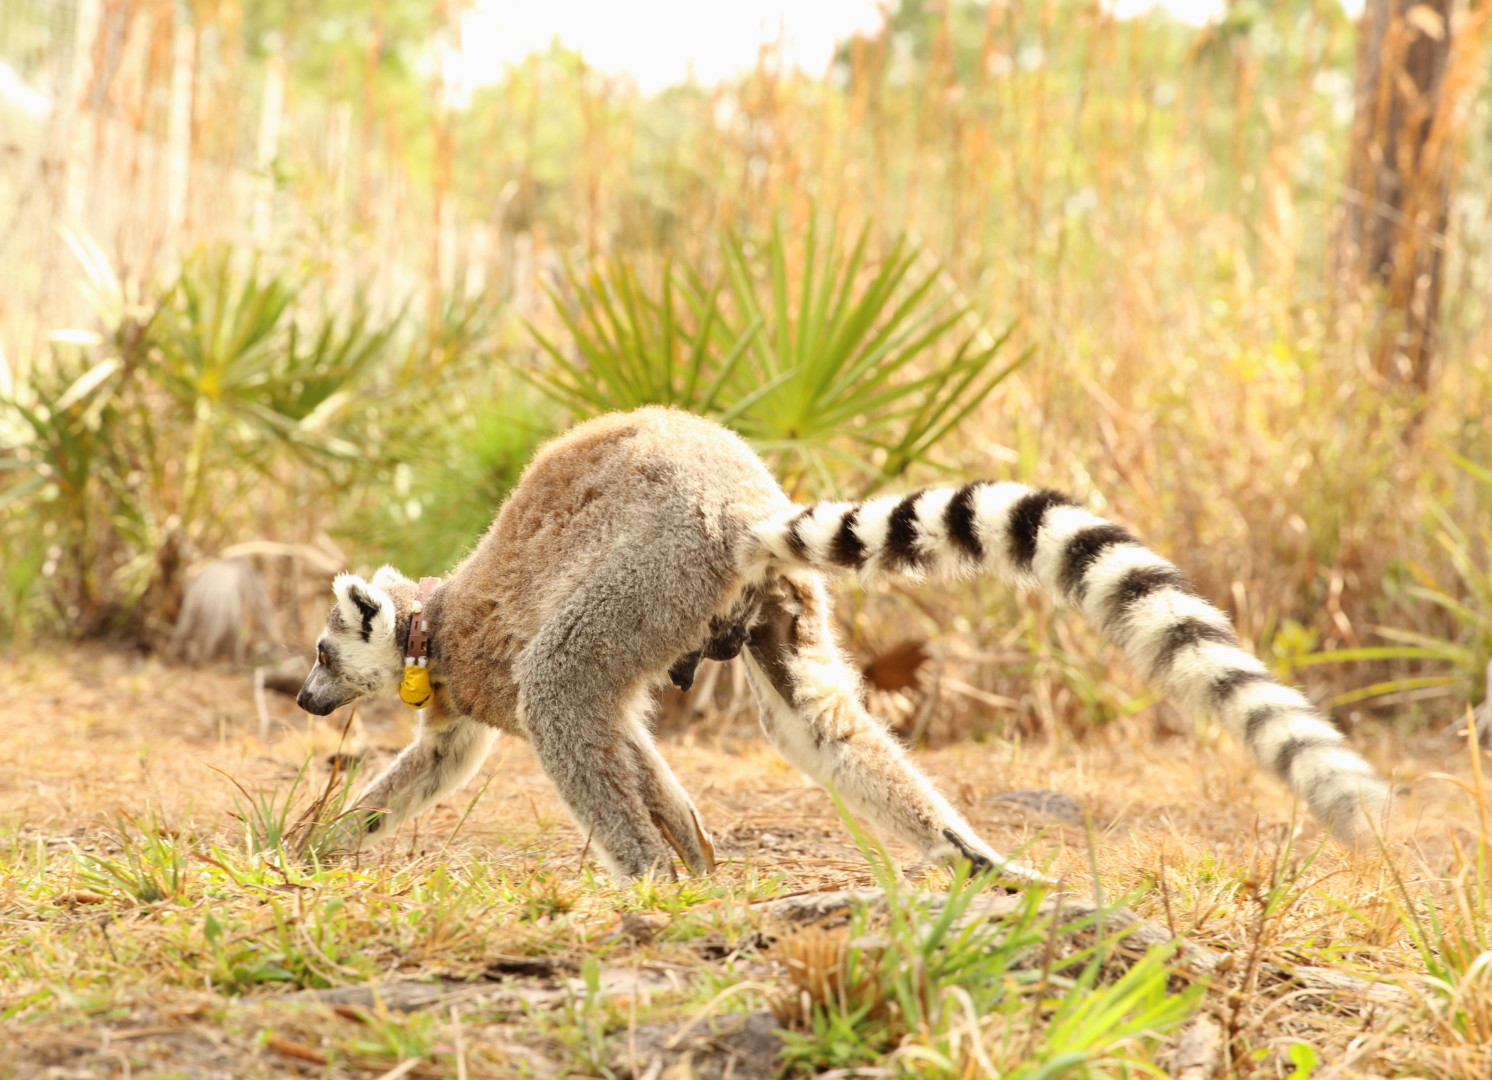 Ring-tailed lemur Yuengling walks away from camera, displaying normal sized testicles.